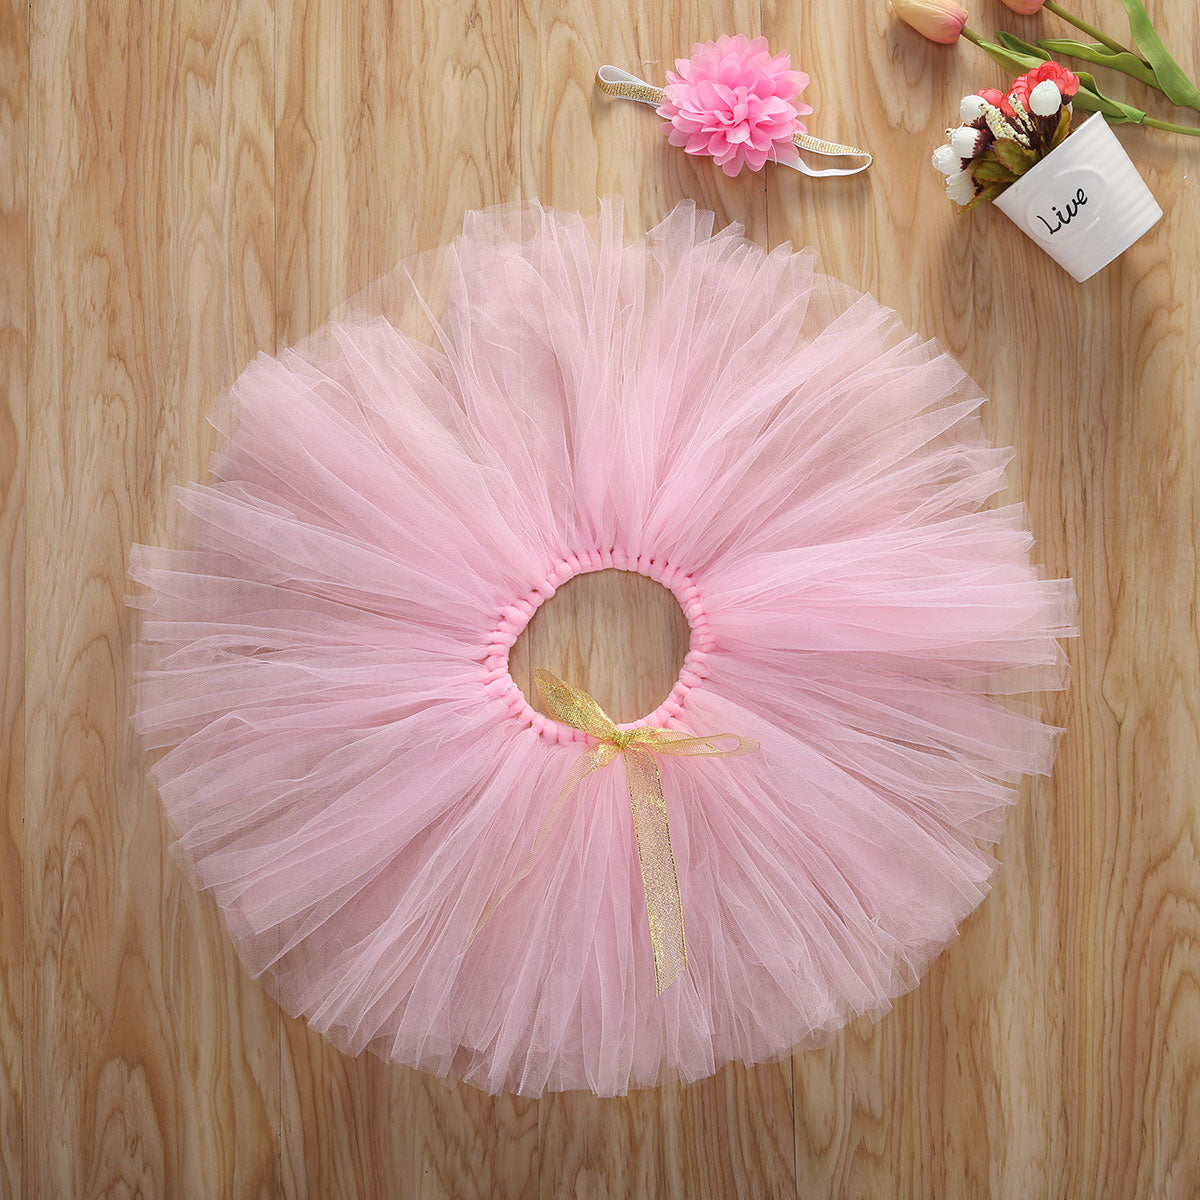 Baby Girl 1st Birthday Outfit with Tutu Dress and Bodysuit